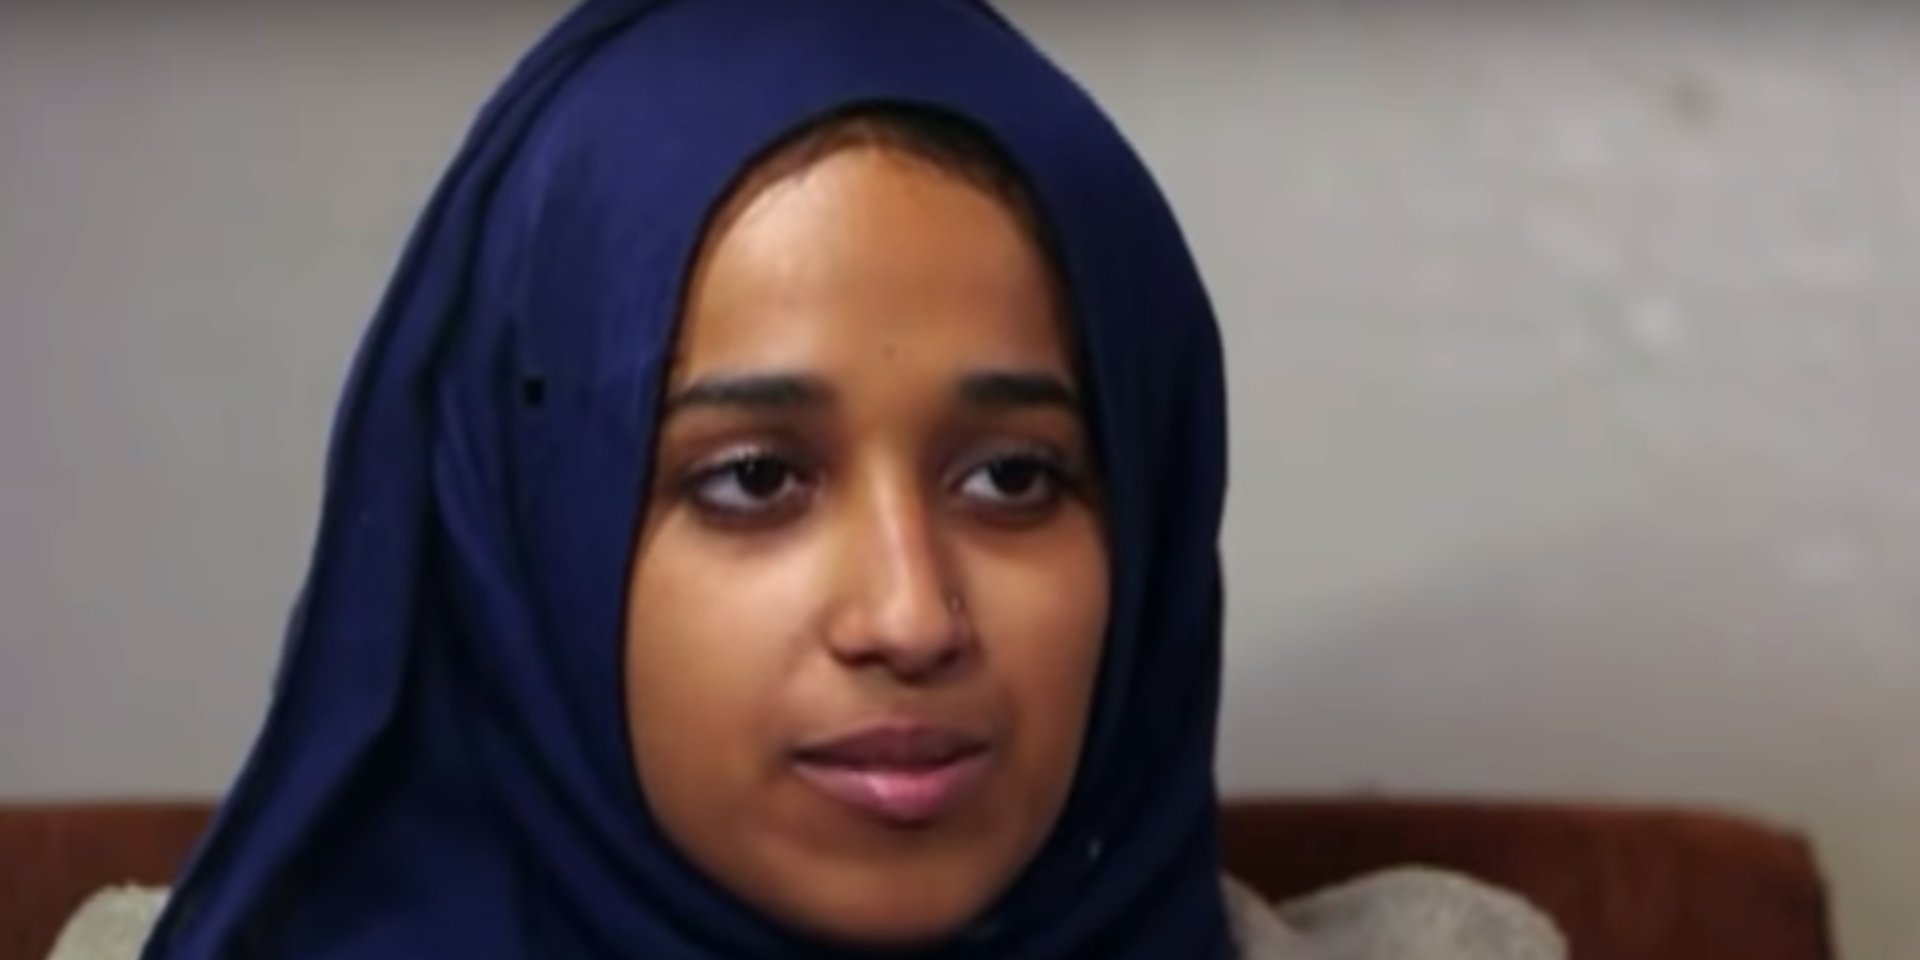 Hoda Muthana wants to come home from Syria – just like many loyalist women who fled to Canada during the American Revolution